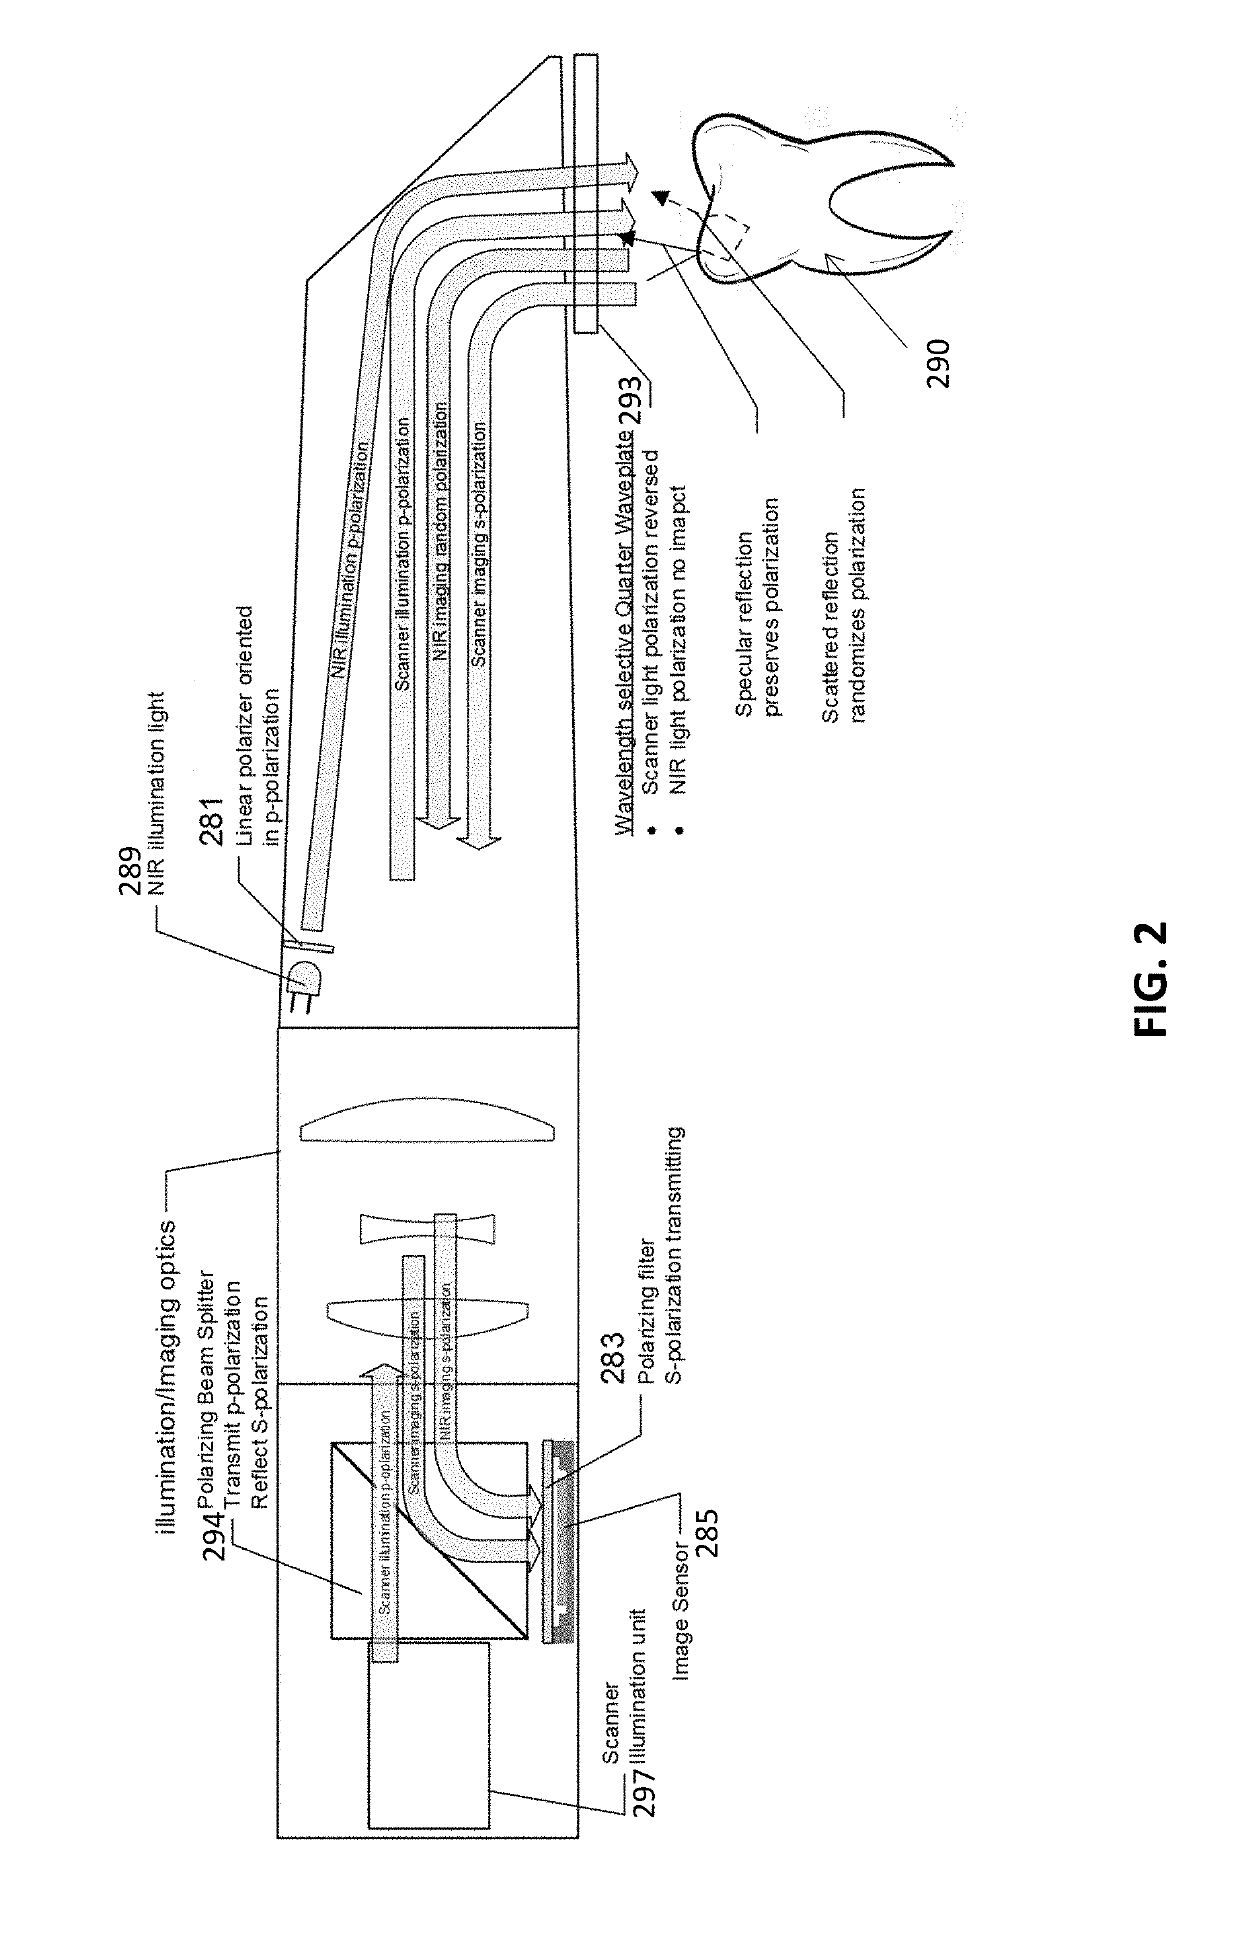 Diagnostic intraoral methods and apparatuses